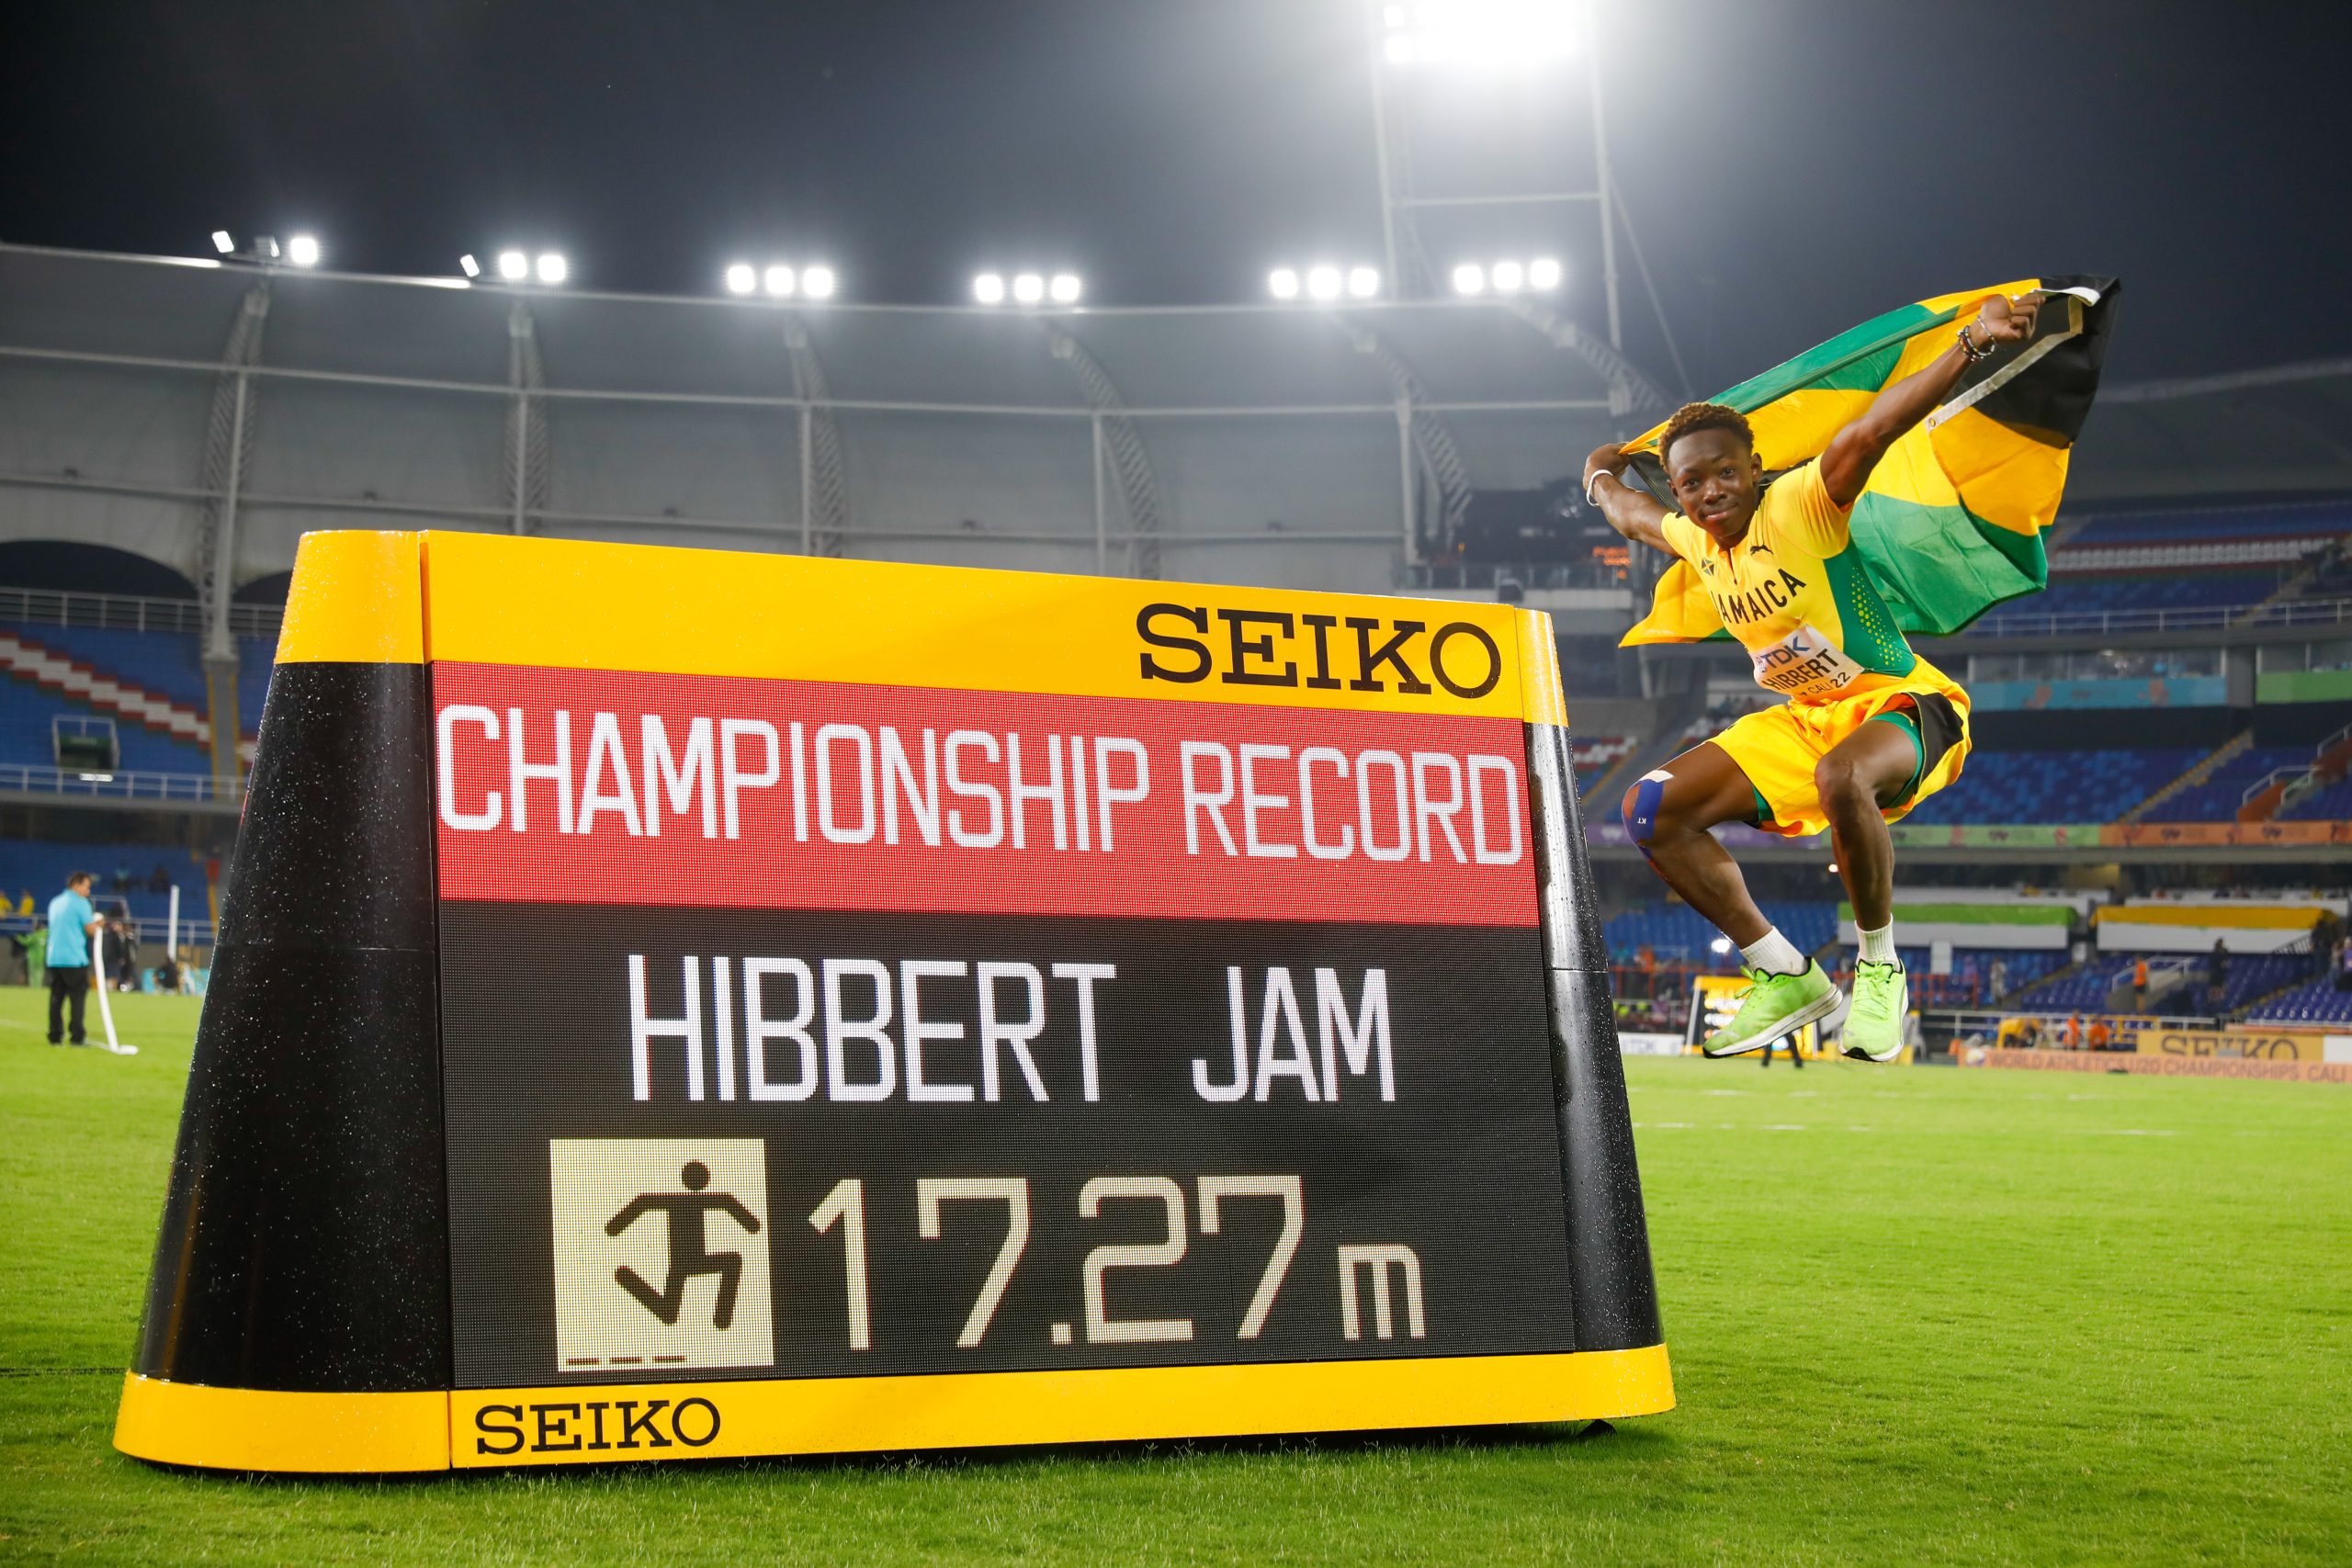 Jaydon Hibbert won the men's triple jump with a championship record mark of 17.27m in Cali, Colombia